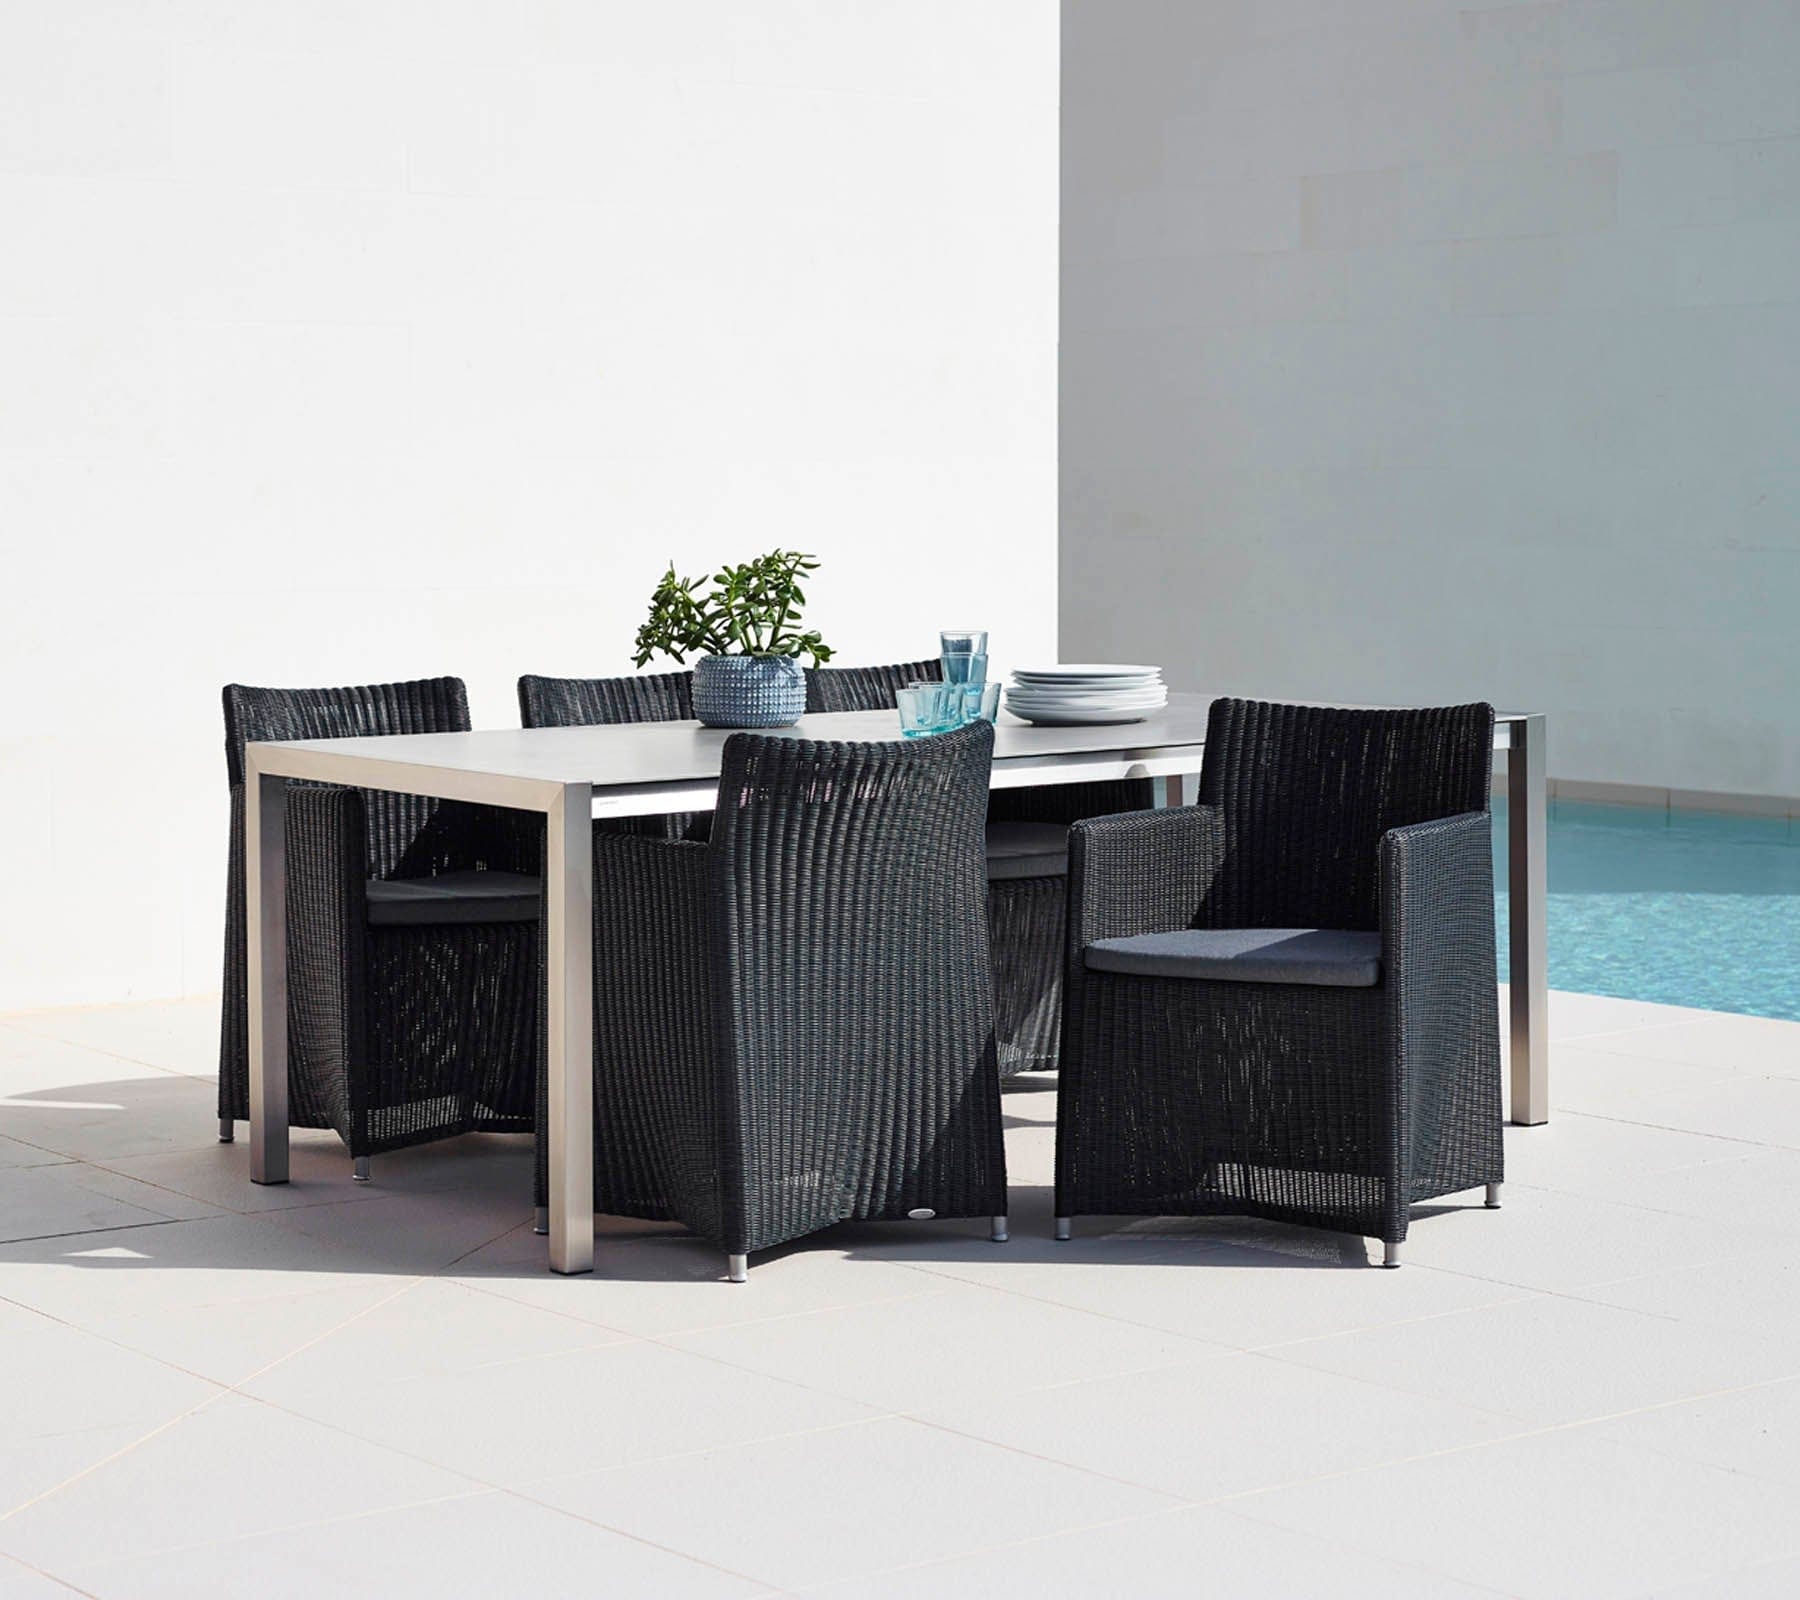 Boxhill's Diamond Terrace Weave Chair lifestyle image with a dining table beside the pool.